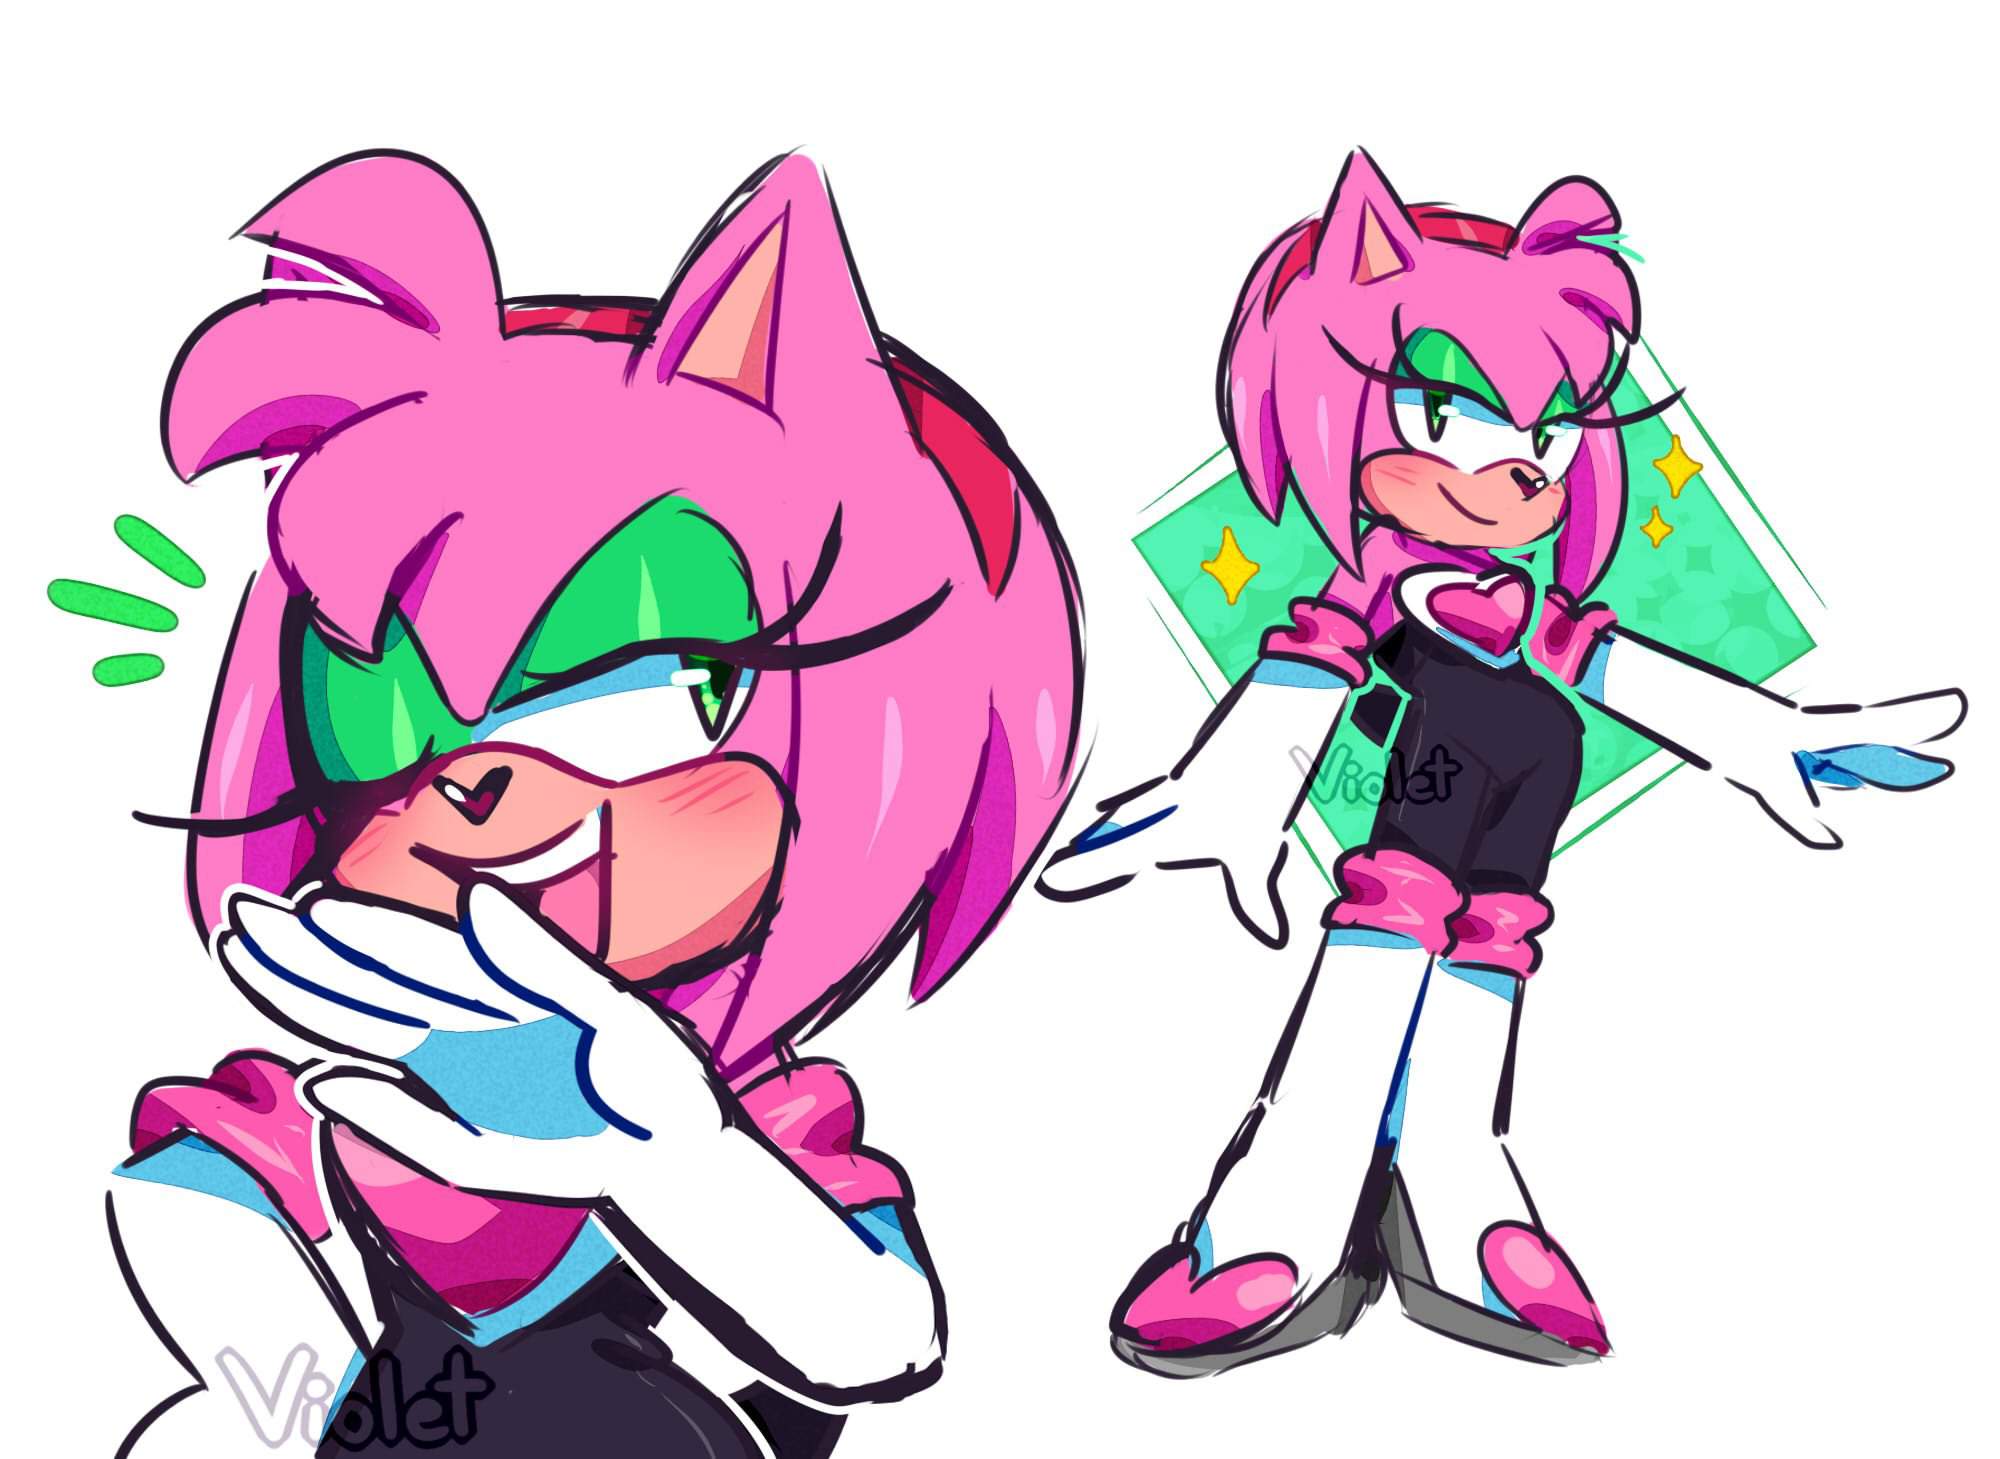 Amy Rouge/Rouge Amy Sonic the Hedgehog! 